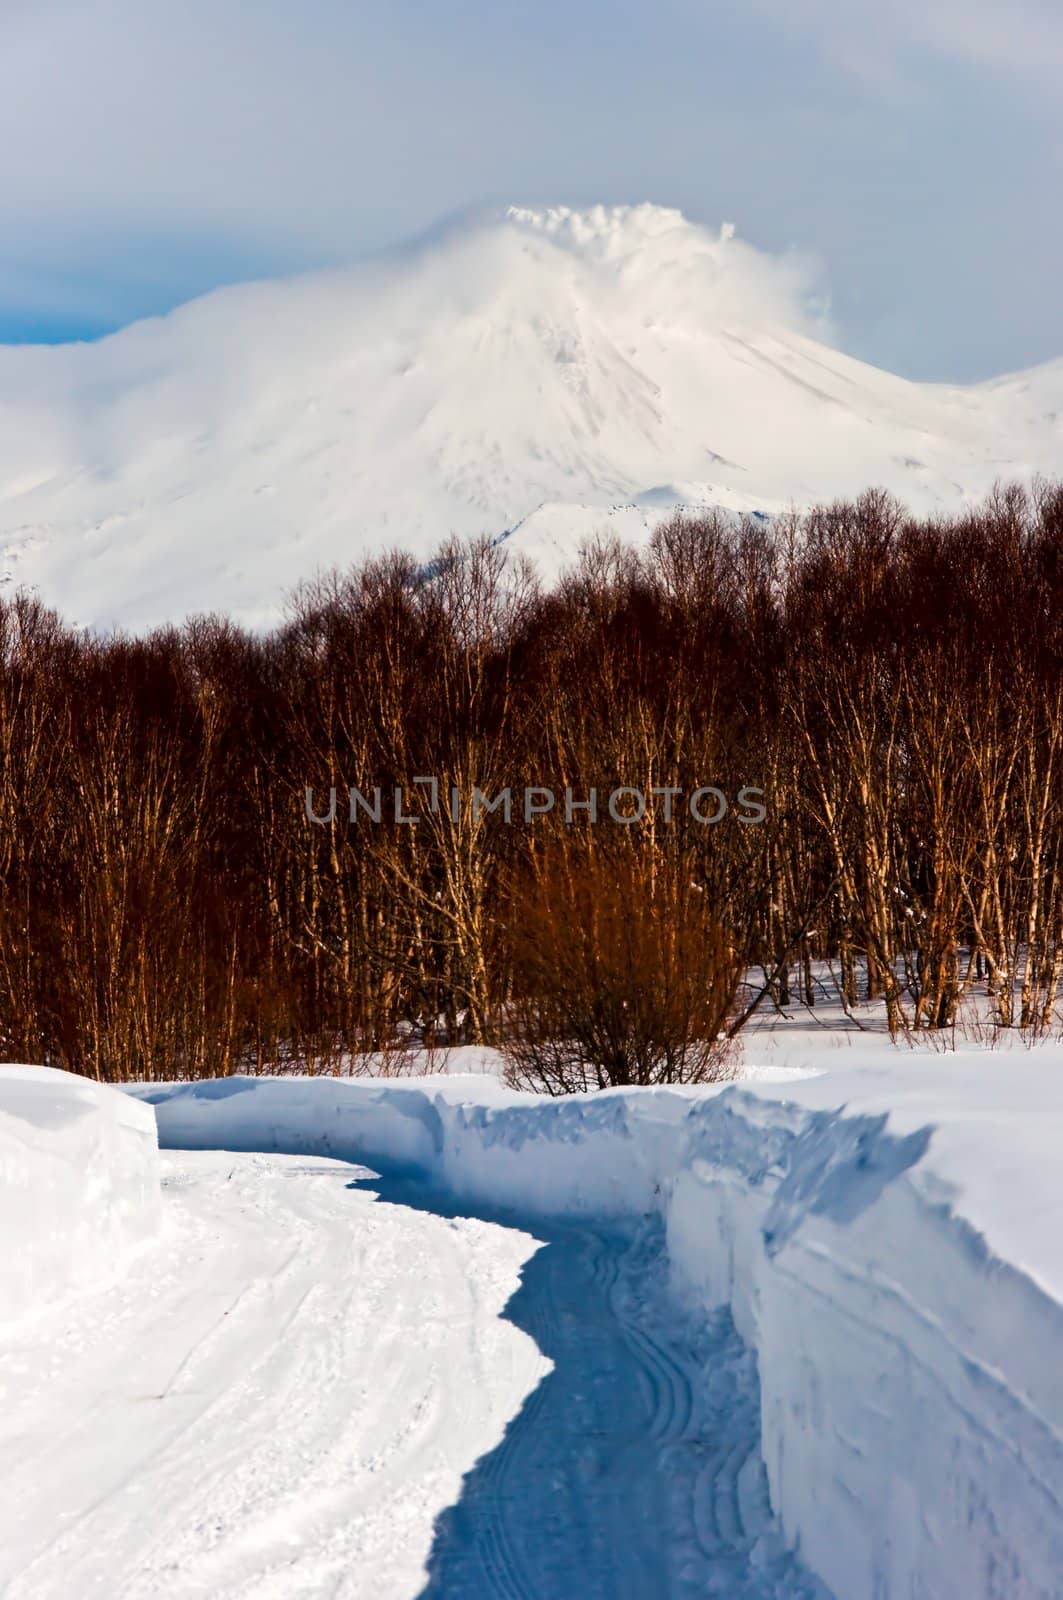 Road to snow to a beautiful volcano in Russia